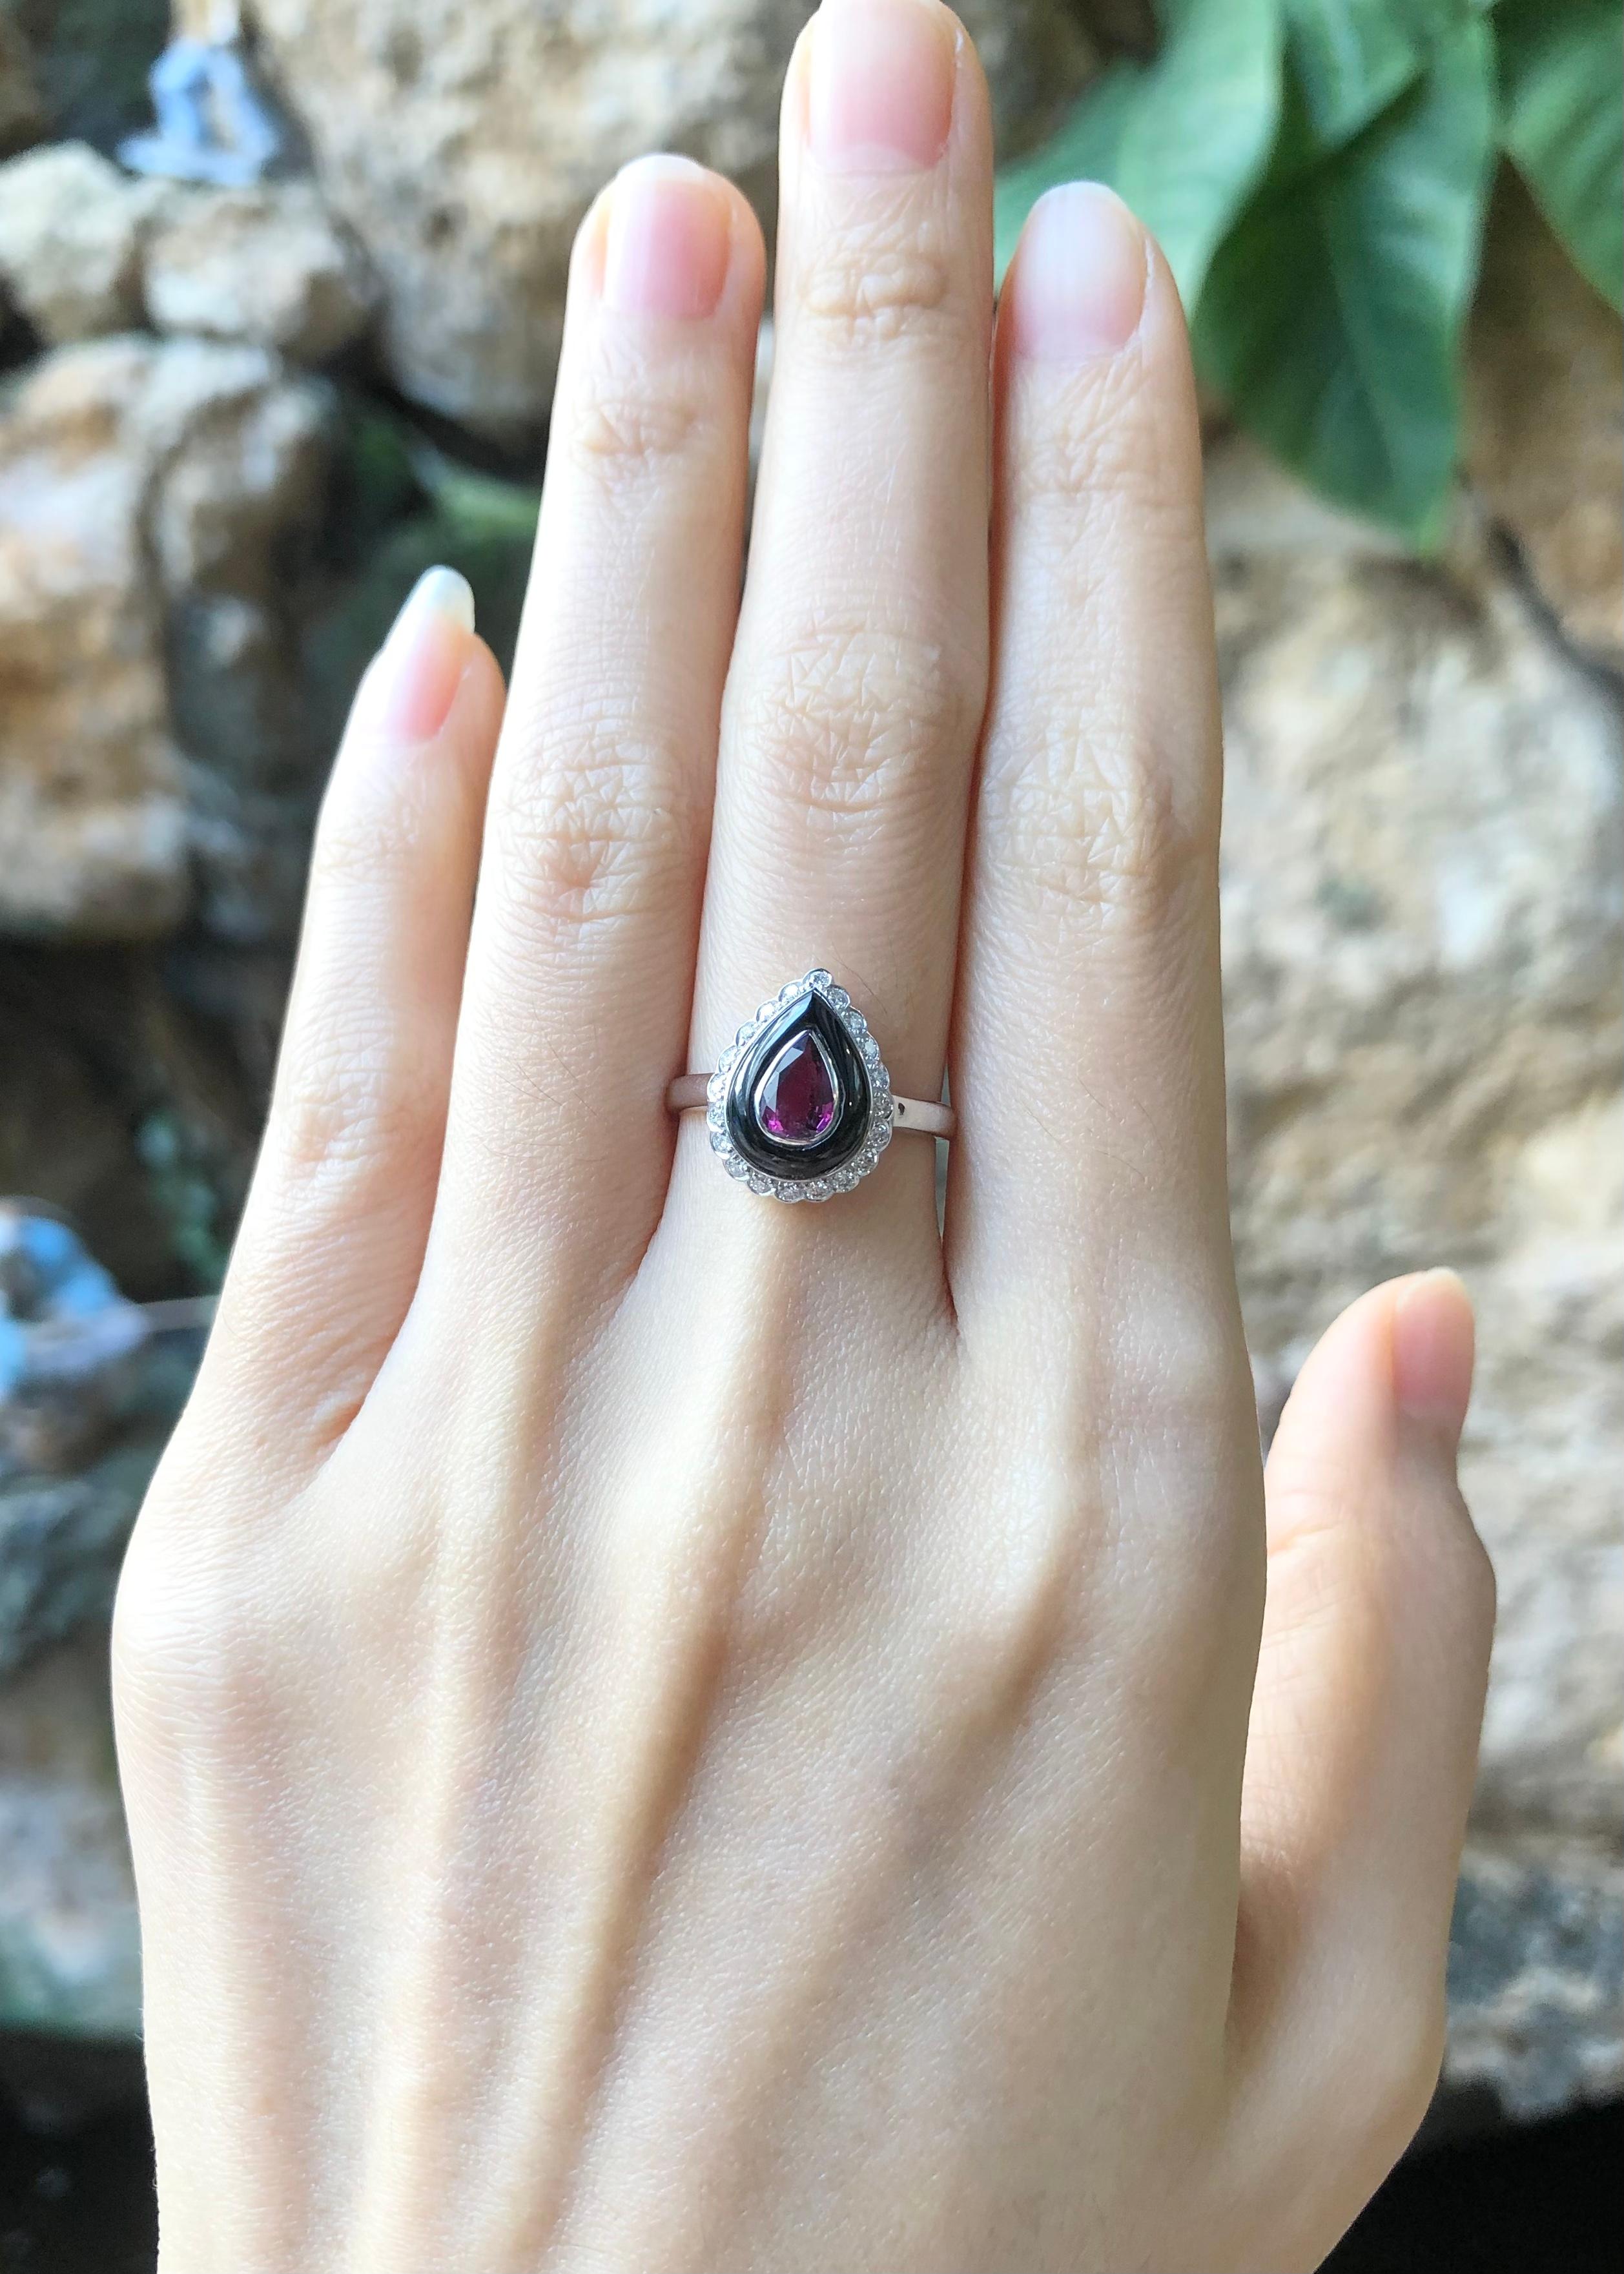 ruby onyx – open wide for us!